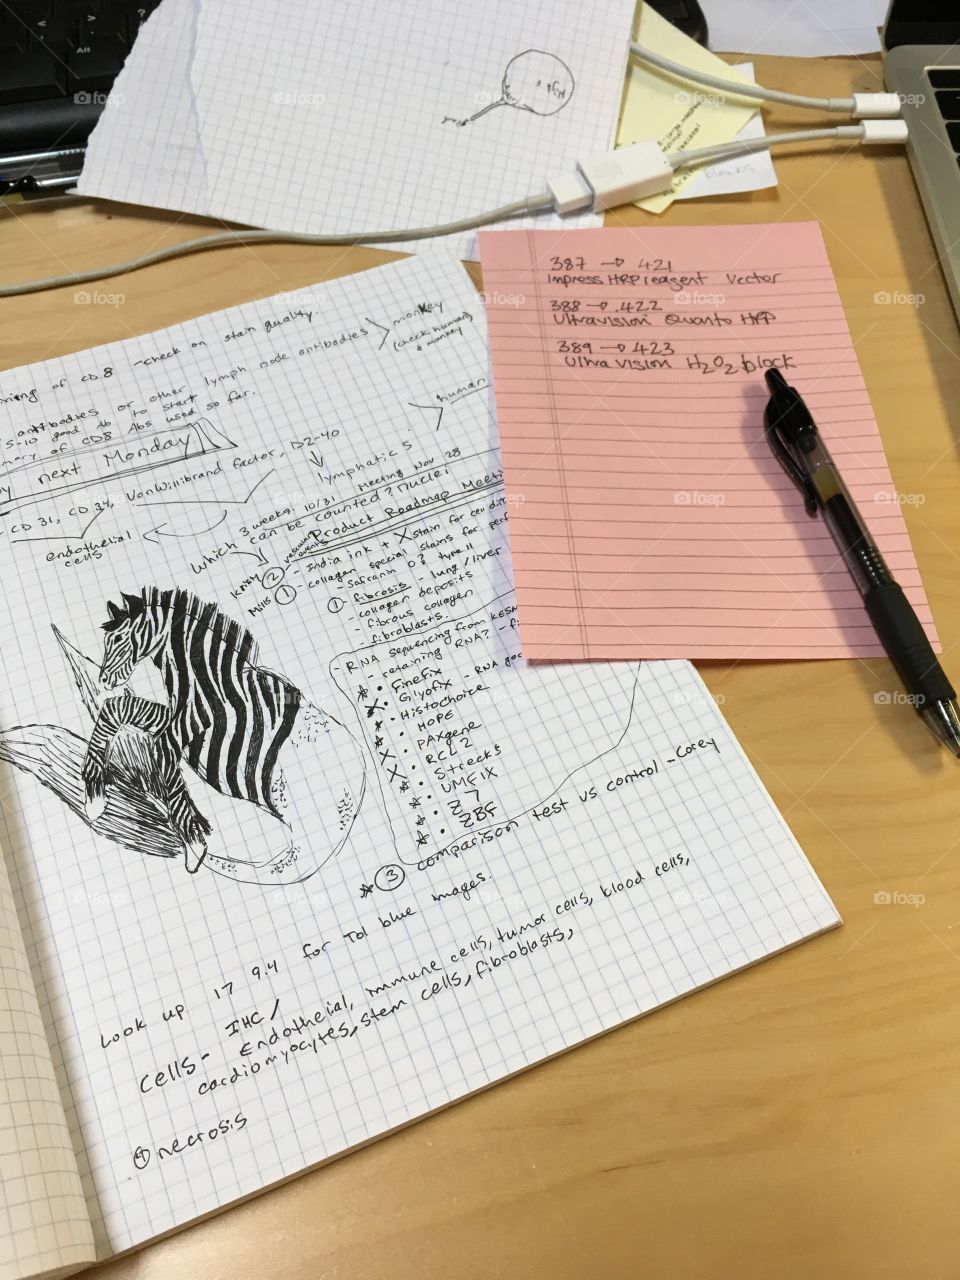 Drawing of a zebra fish on meeting notes in a notebook on a desk top